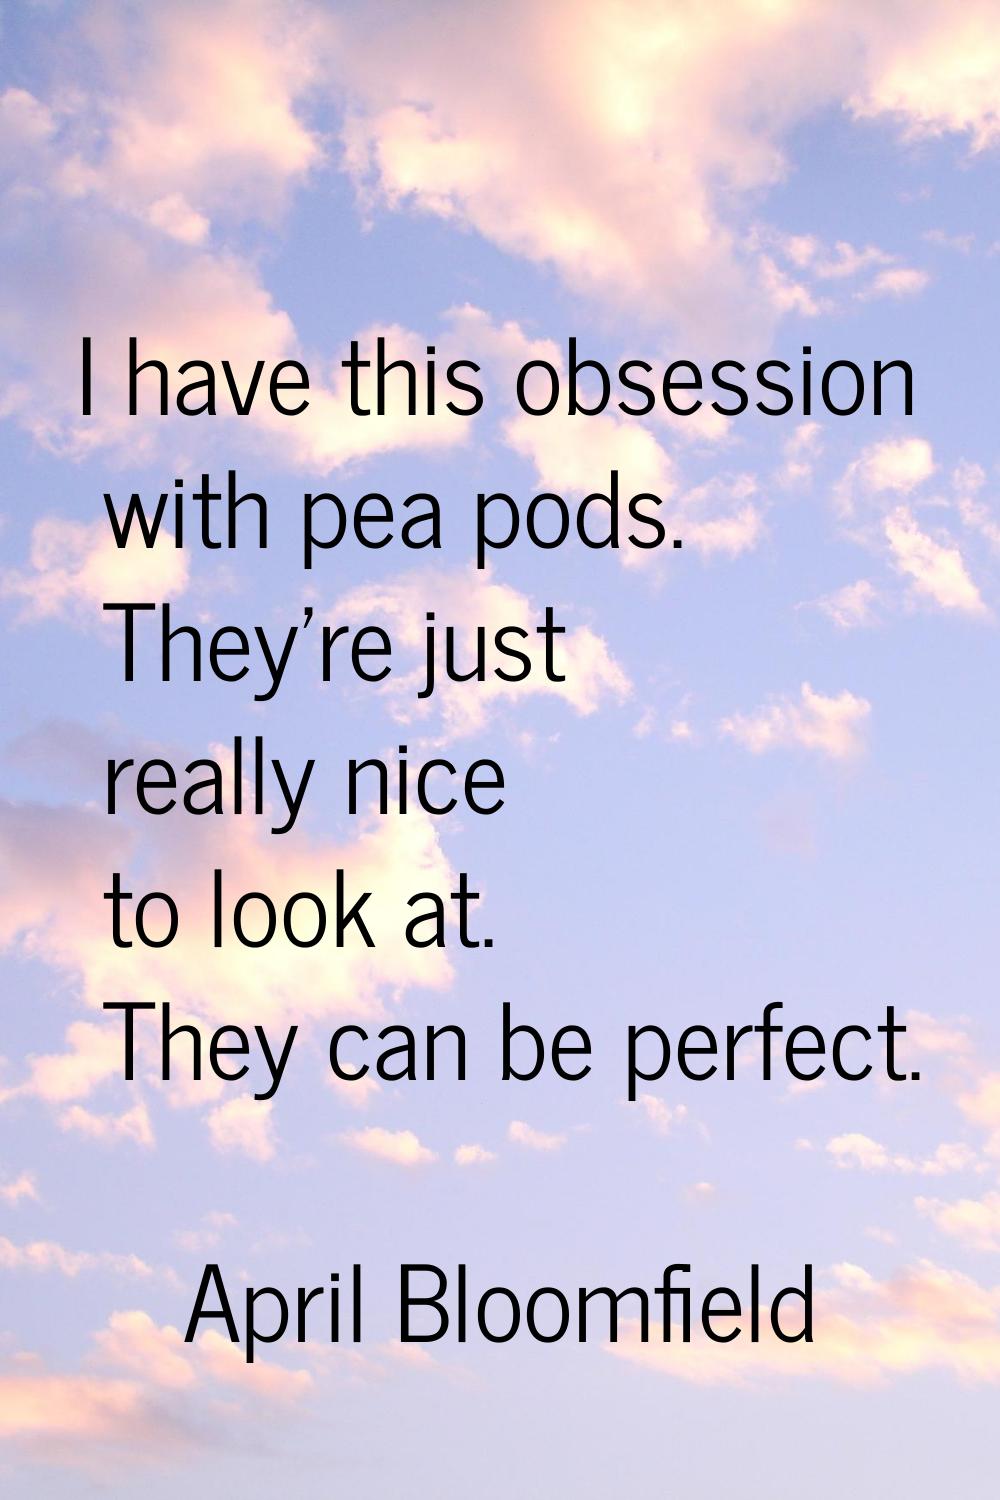 I have this obsession with pea pods. They're just really nice to look at. They can be perfect.